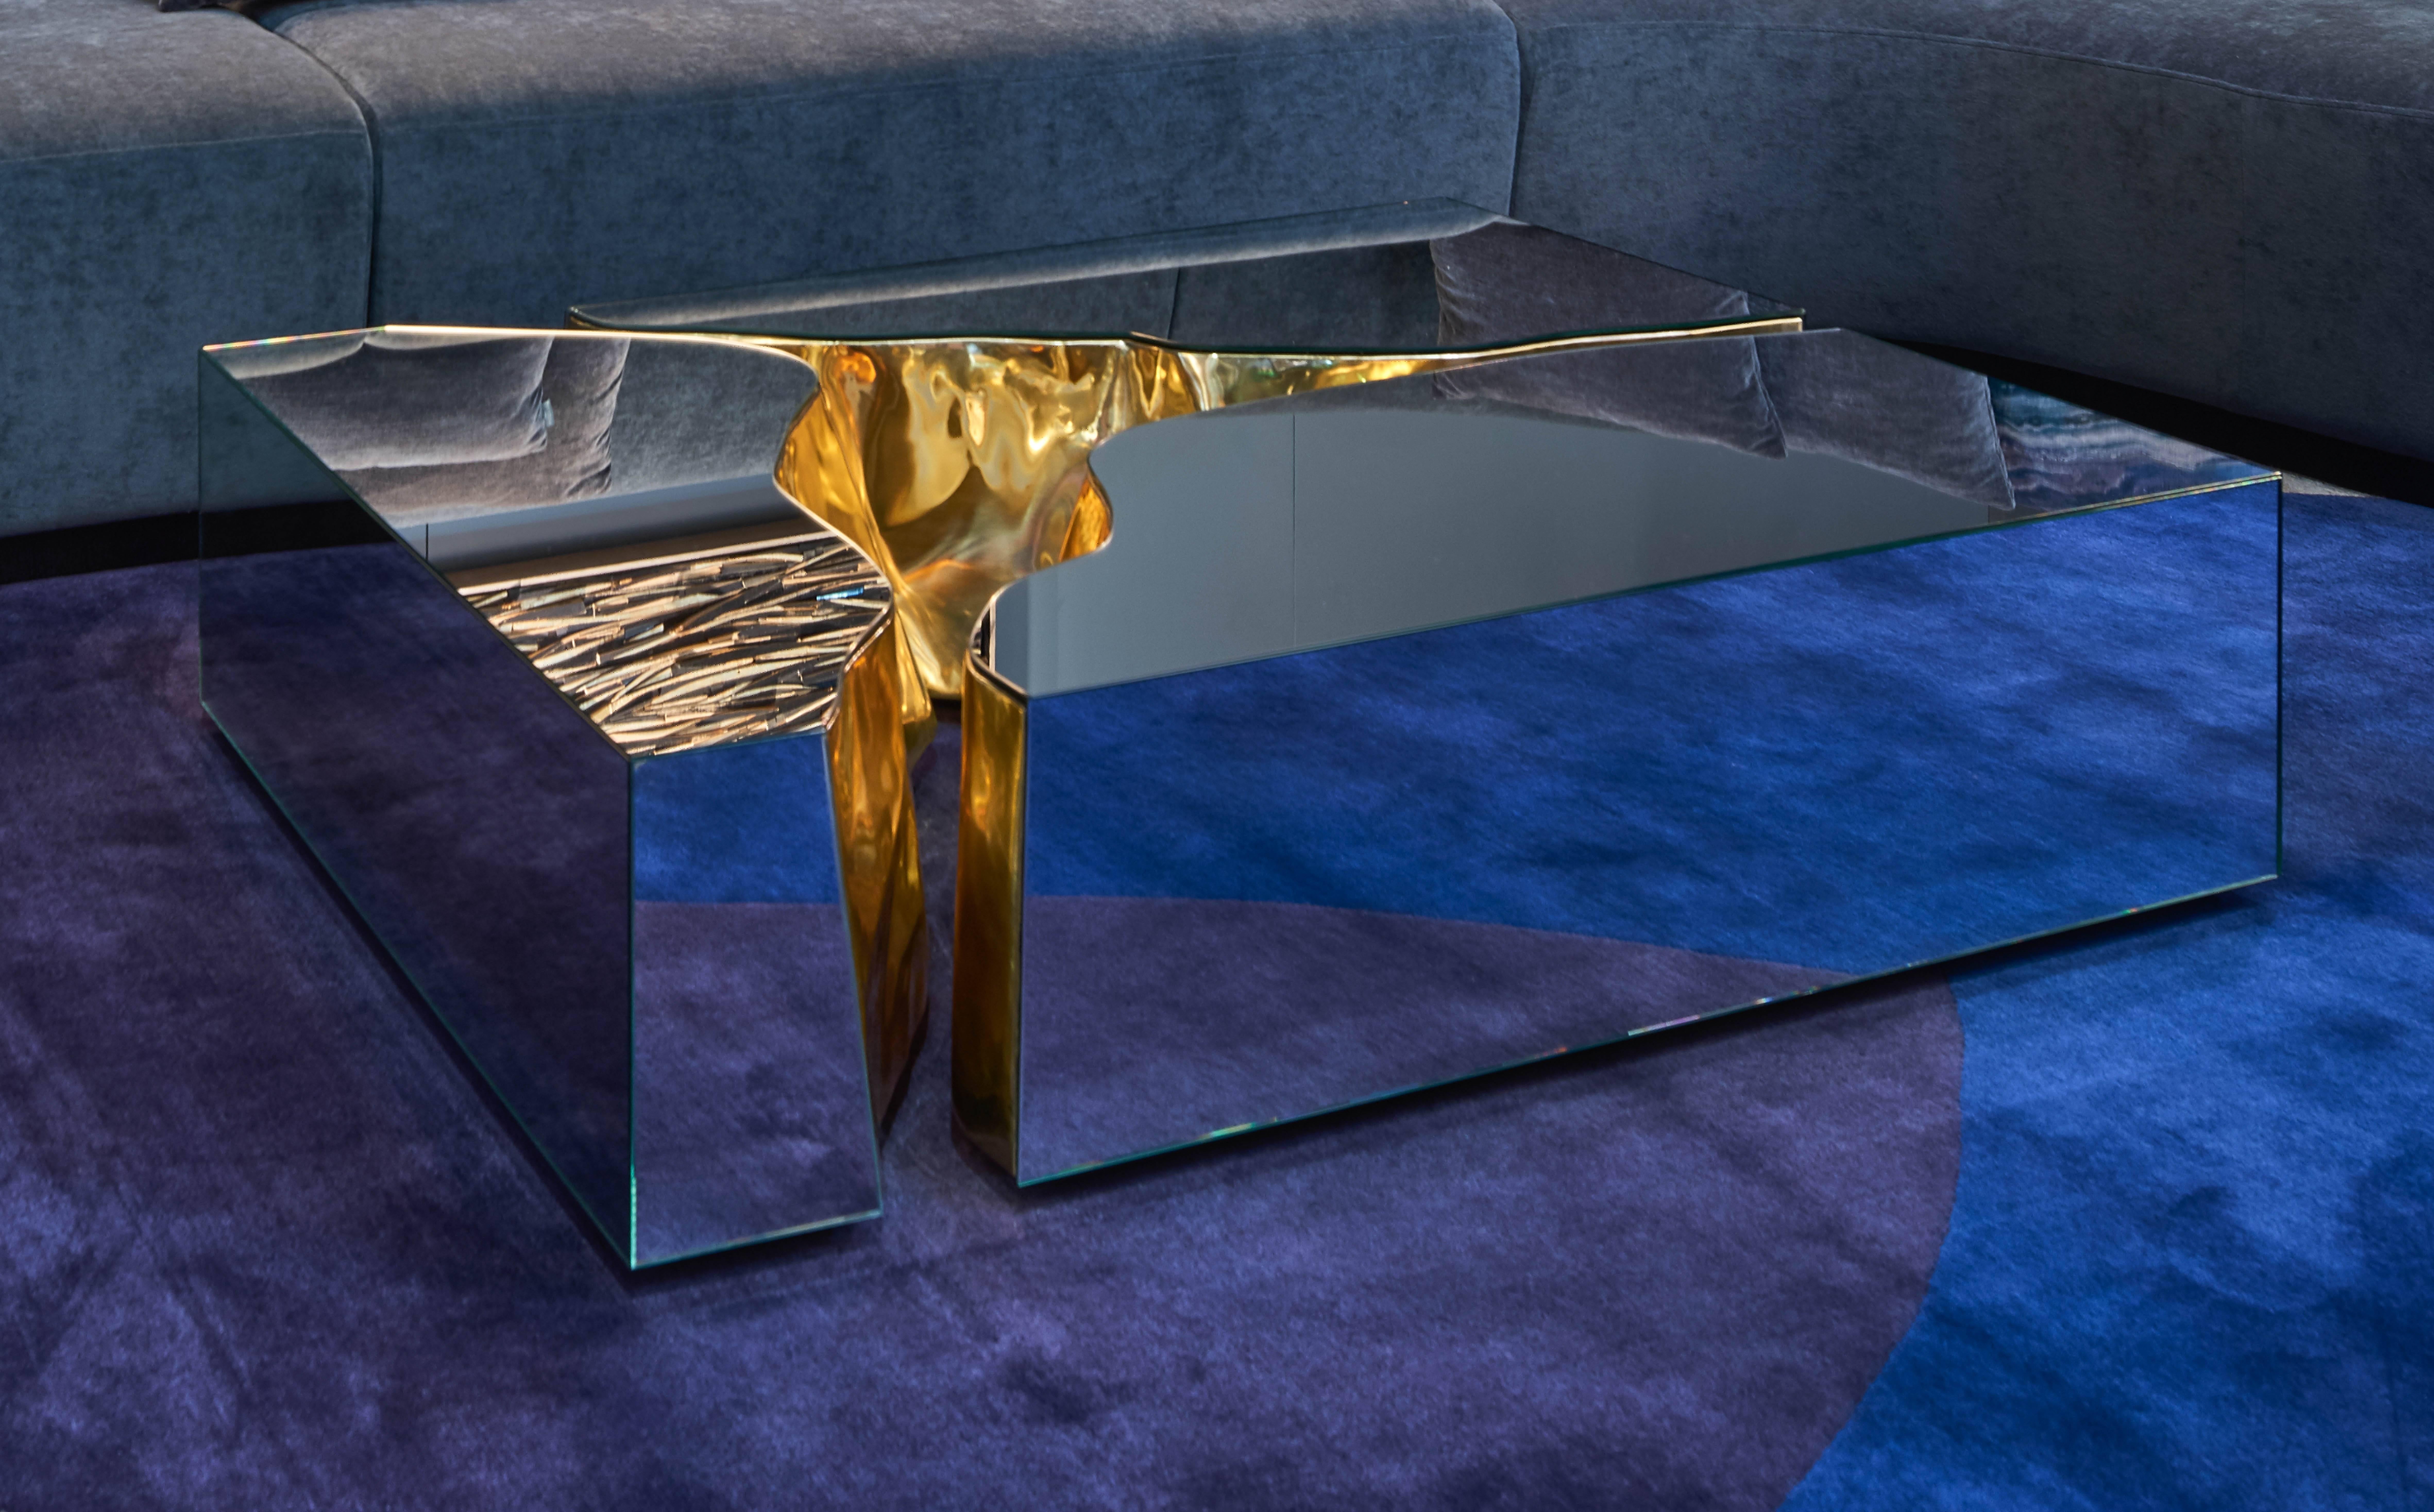 This mirrored coffee table is an incredibly luxurious sculptural centrepiece (picture 1-5). It was inspired by the typical karst Formations produced by surface dissolution of limestone or dolomite rocks. The stone freezes and cracks, to show a rich